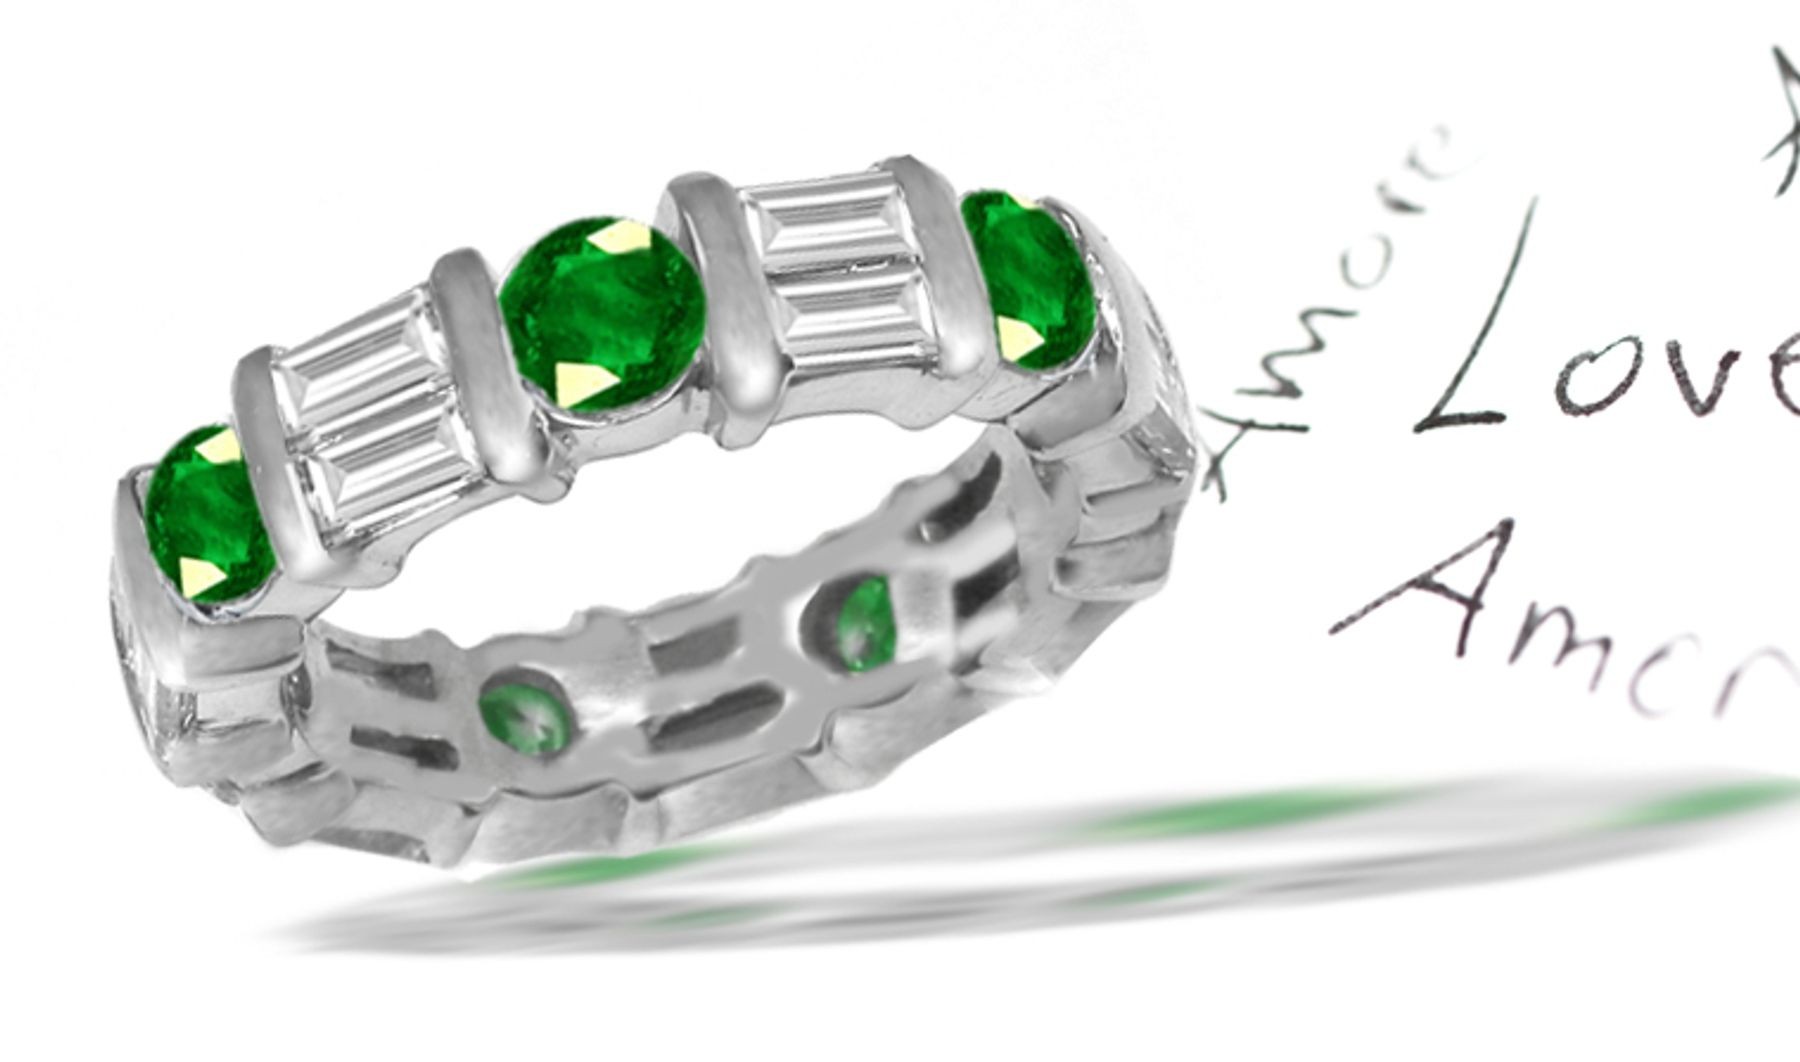 "Beautiful in Form": Gold Baguette Diamond & Emerald Eternity Ring with Green Appear Darker Blue